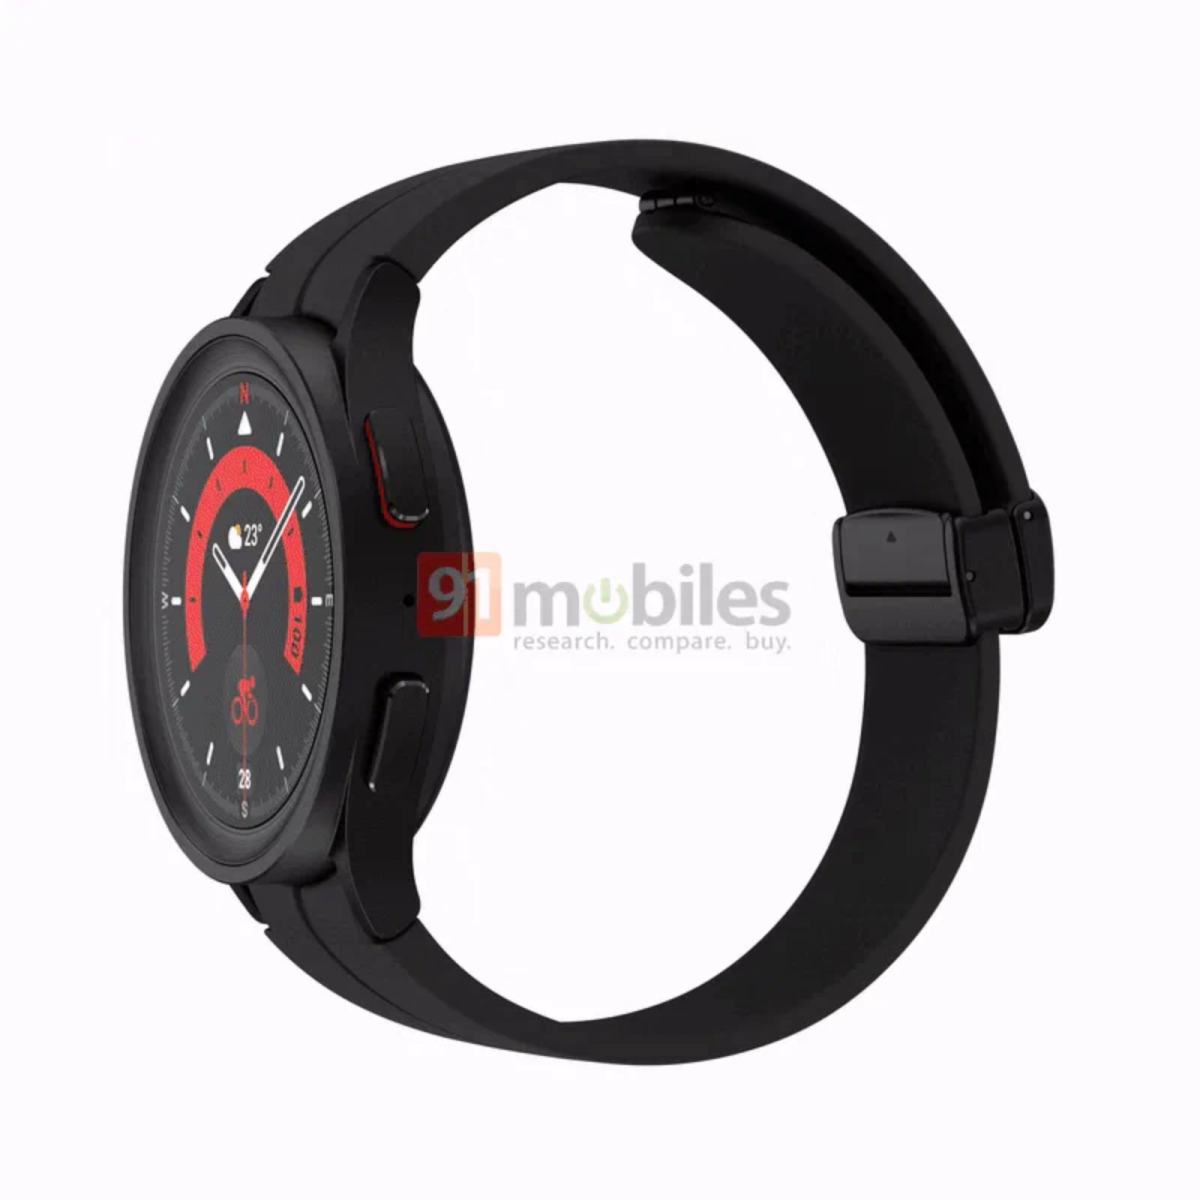 Official renders of Galaxy Watch 5